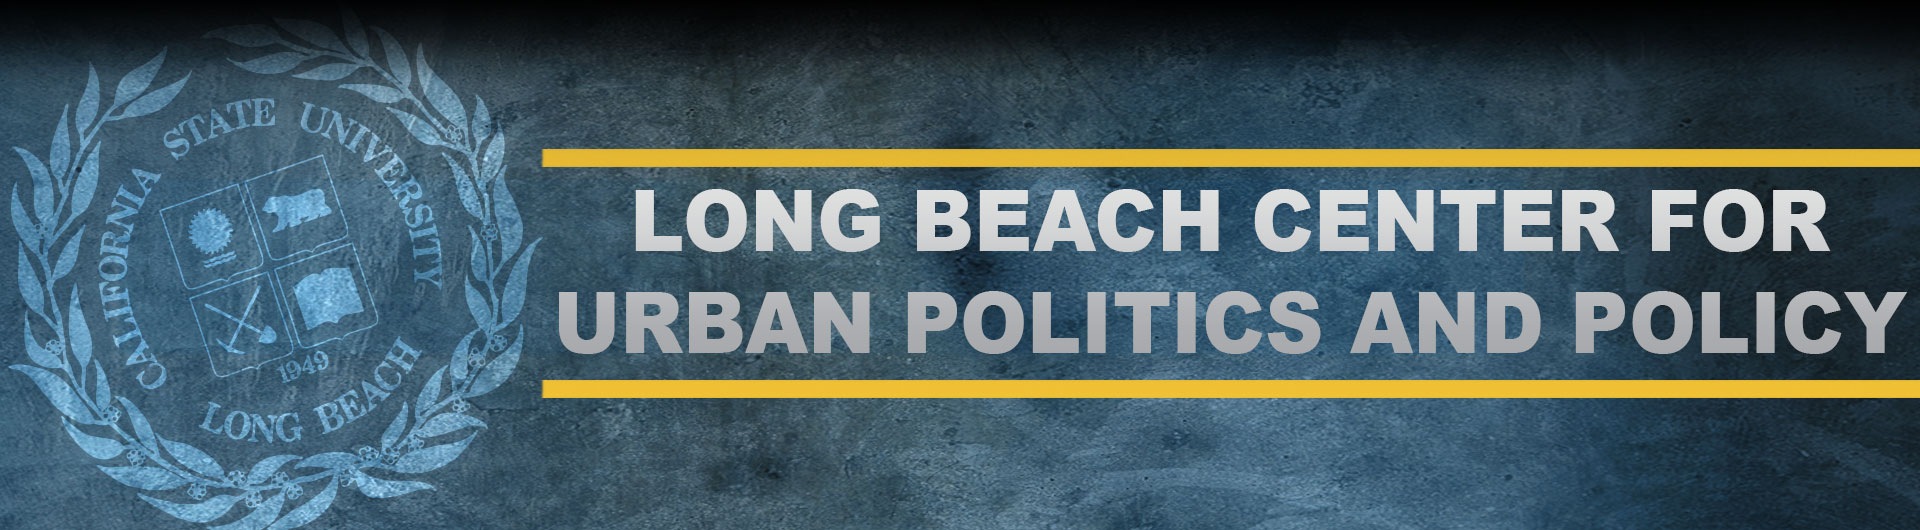 Long Beach Center for Urban Politics and Policy